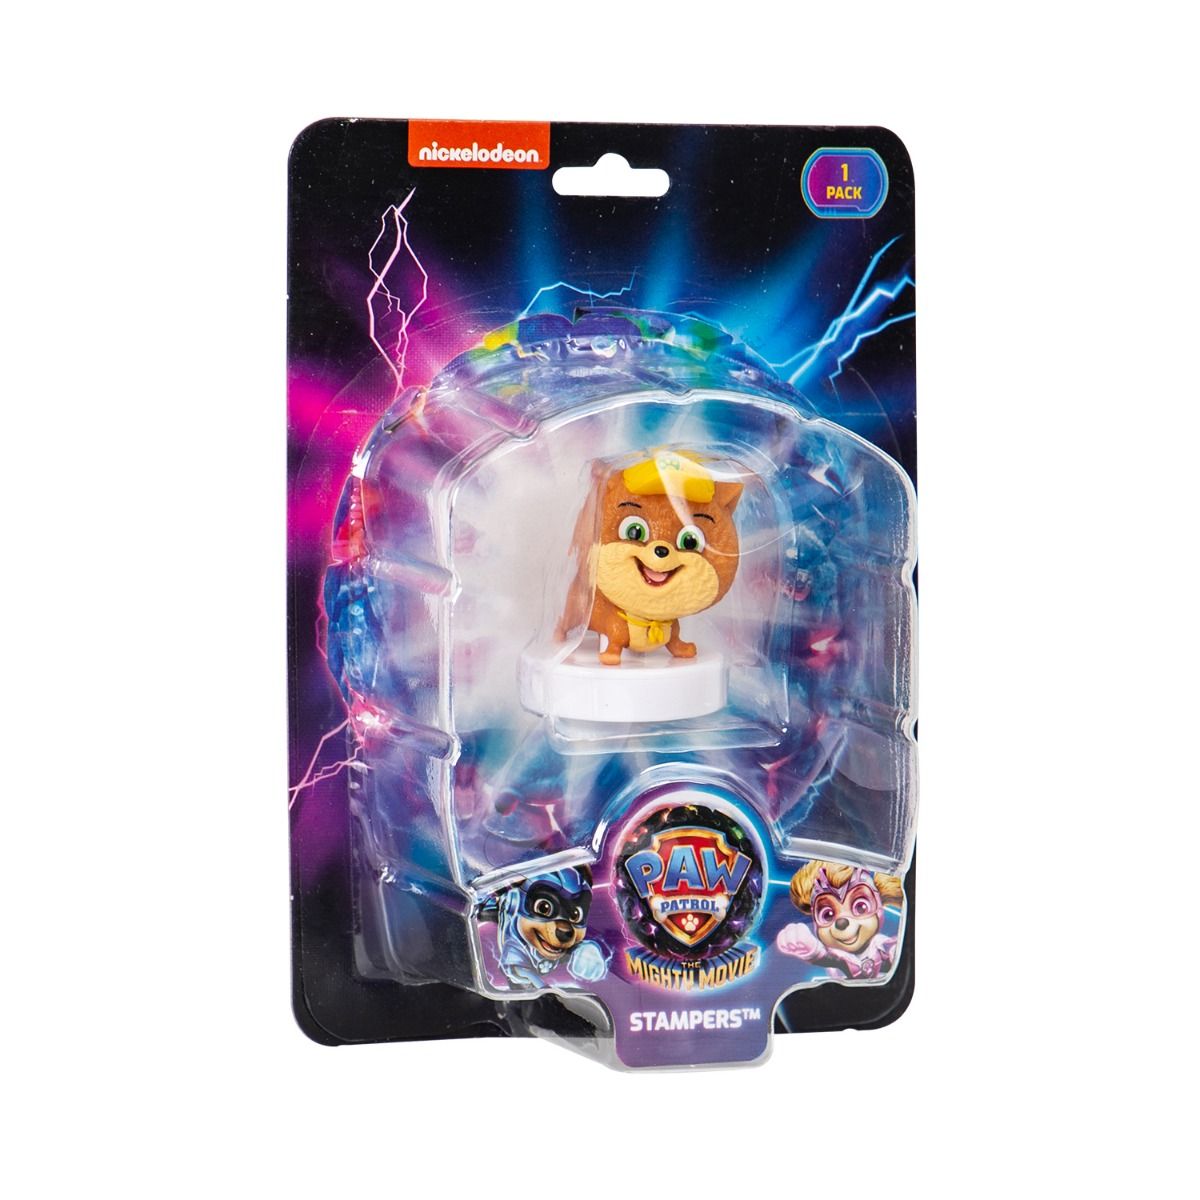 Paw Patrol: The Mighty Movie Stampers - Pack of 1  (Assorted)